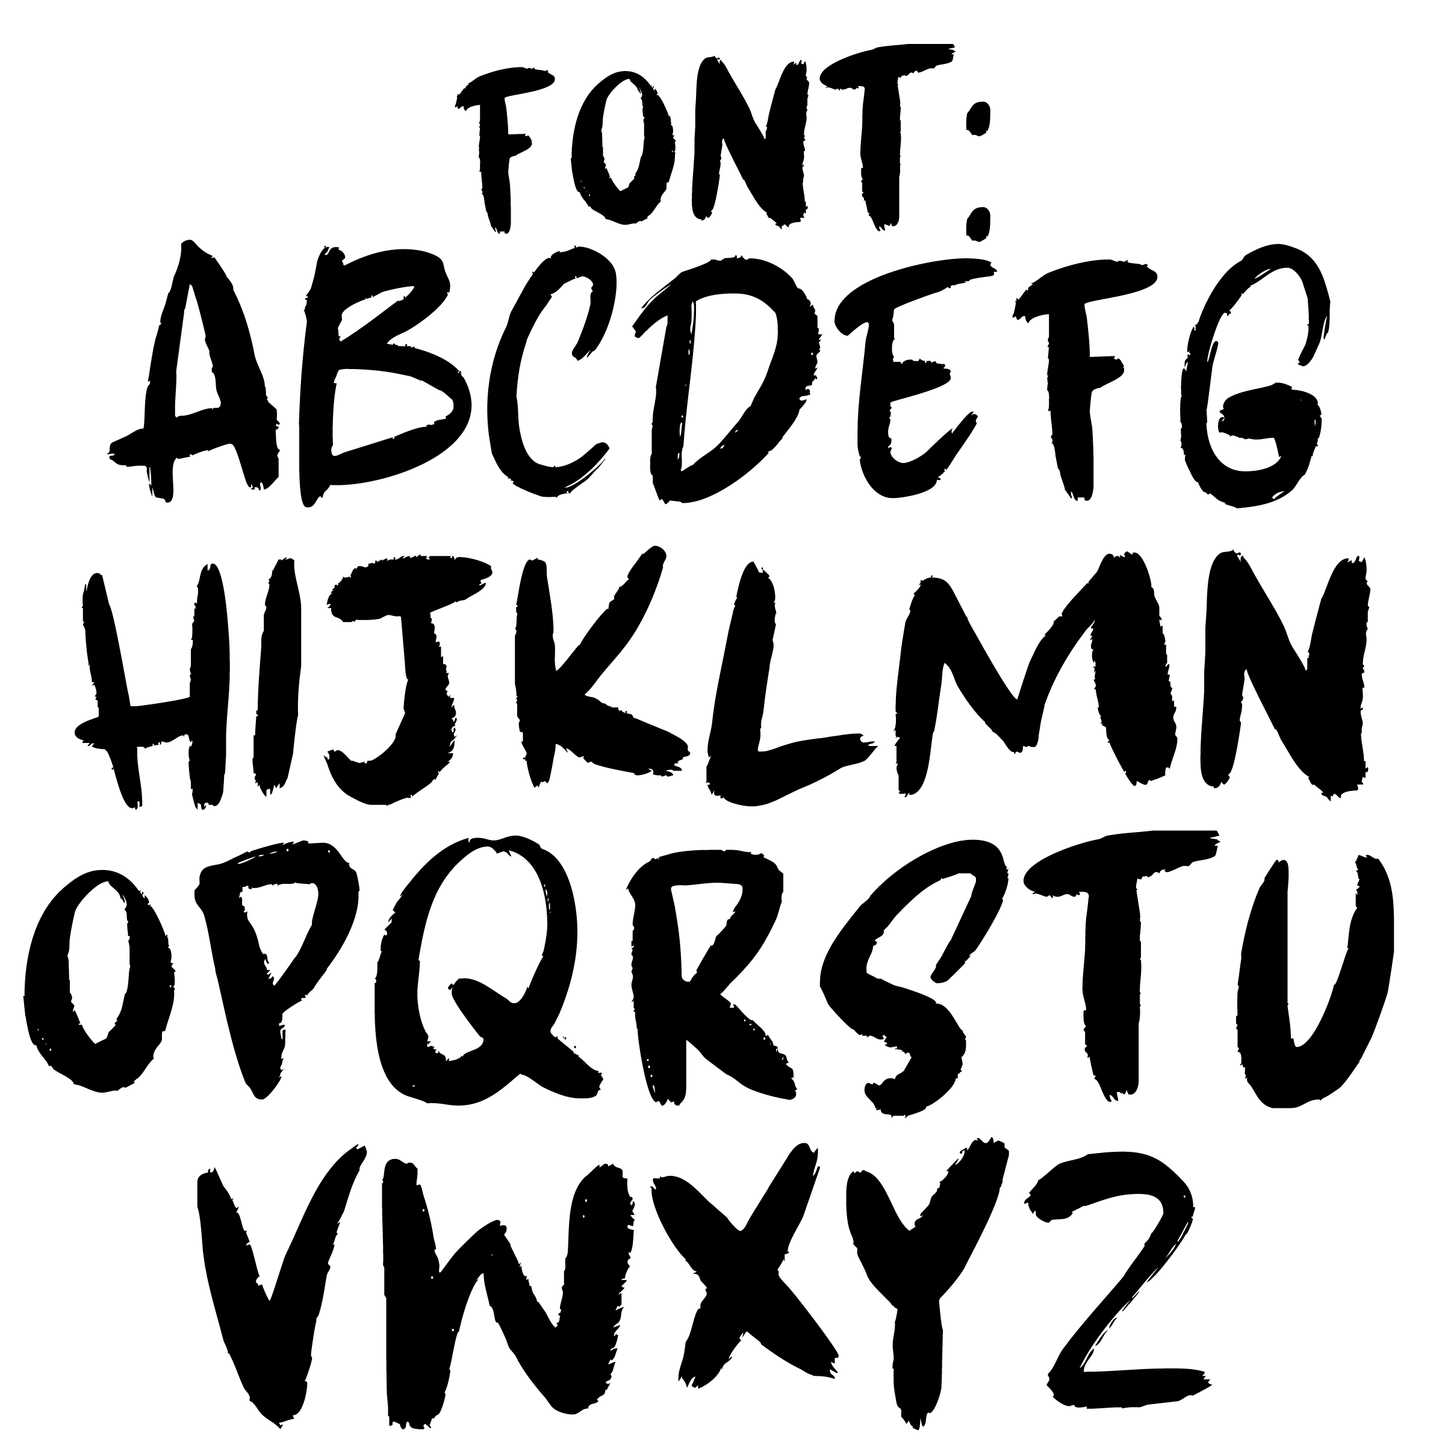 The alphabet font used for the kids backpack name on the bottom